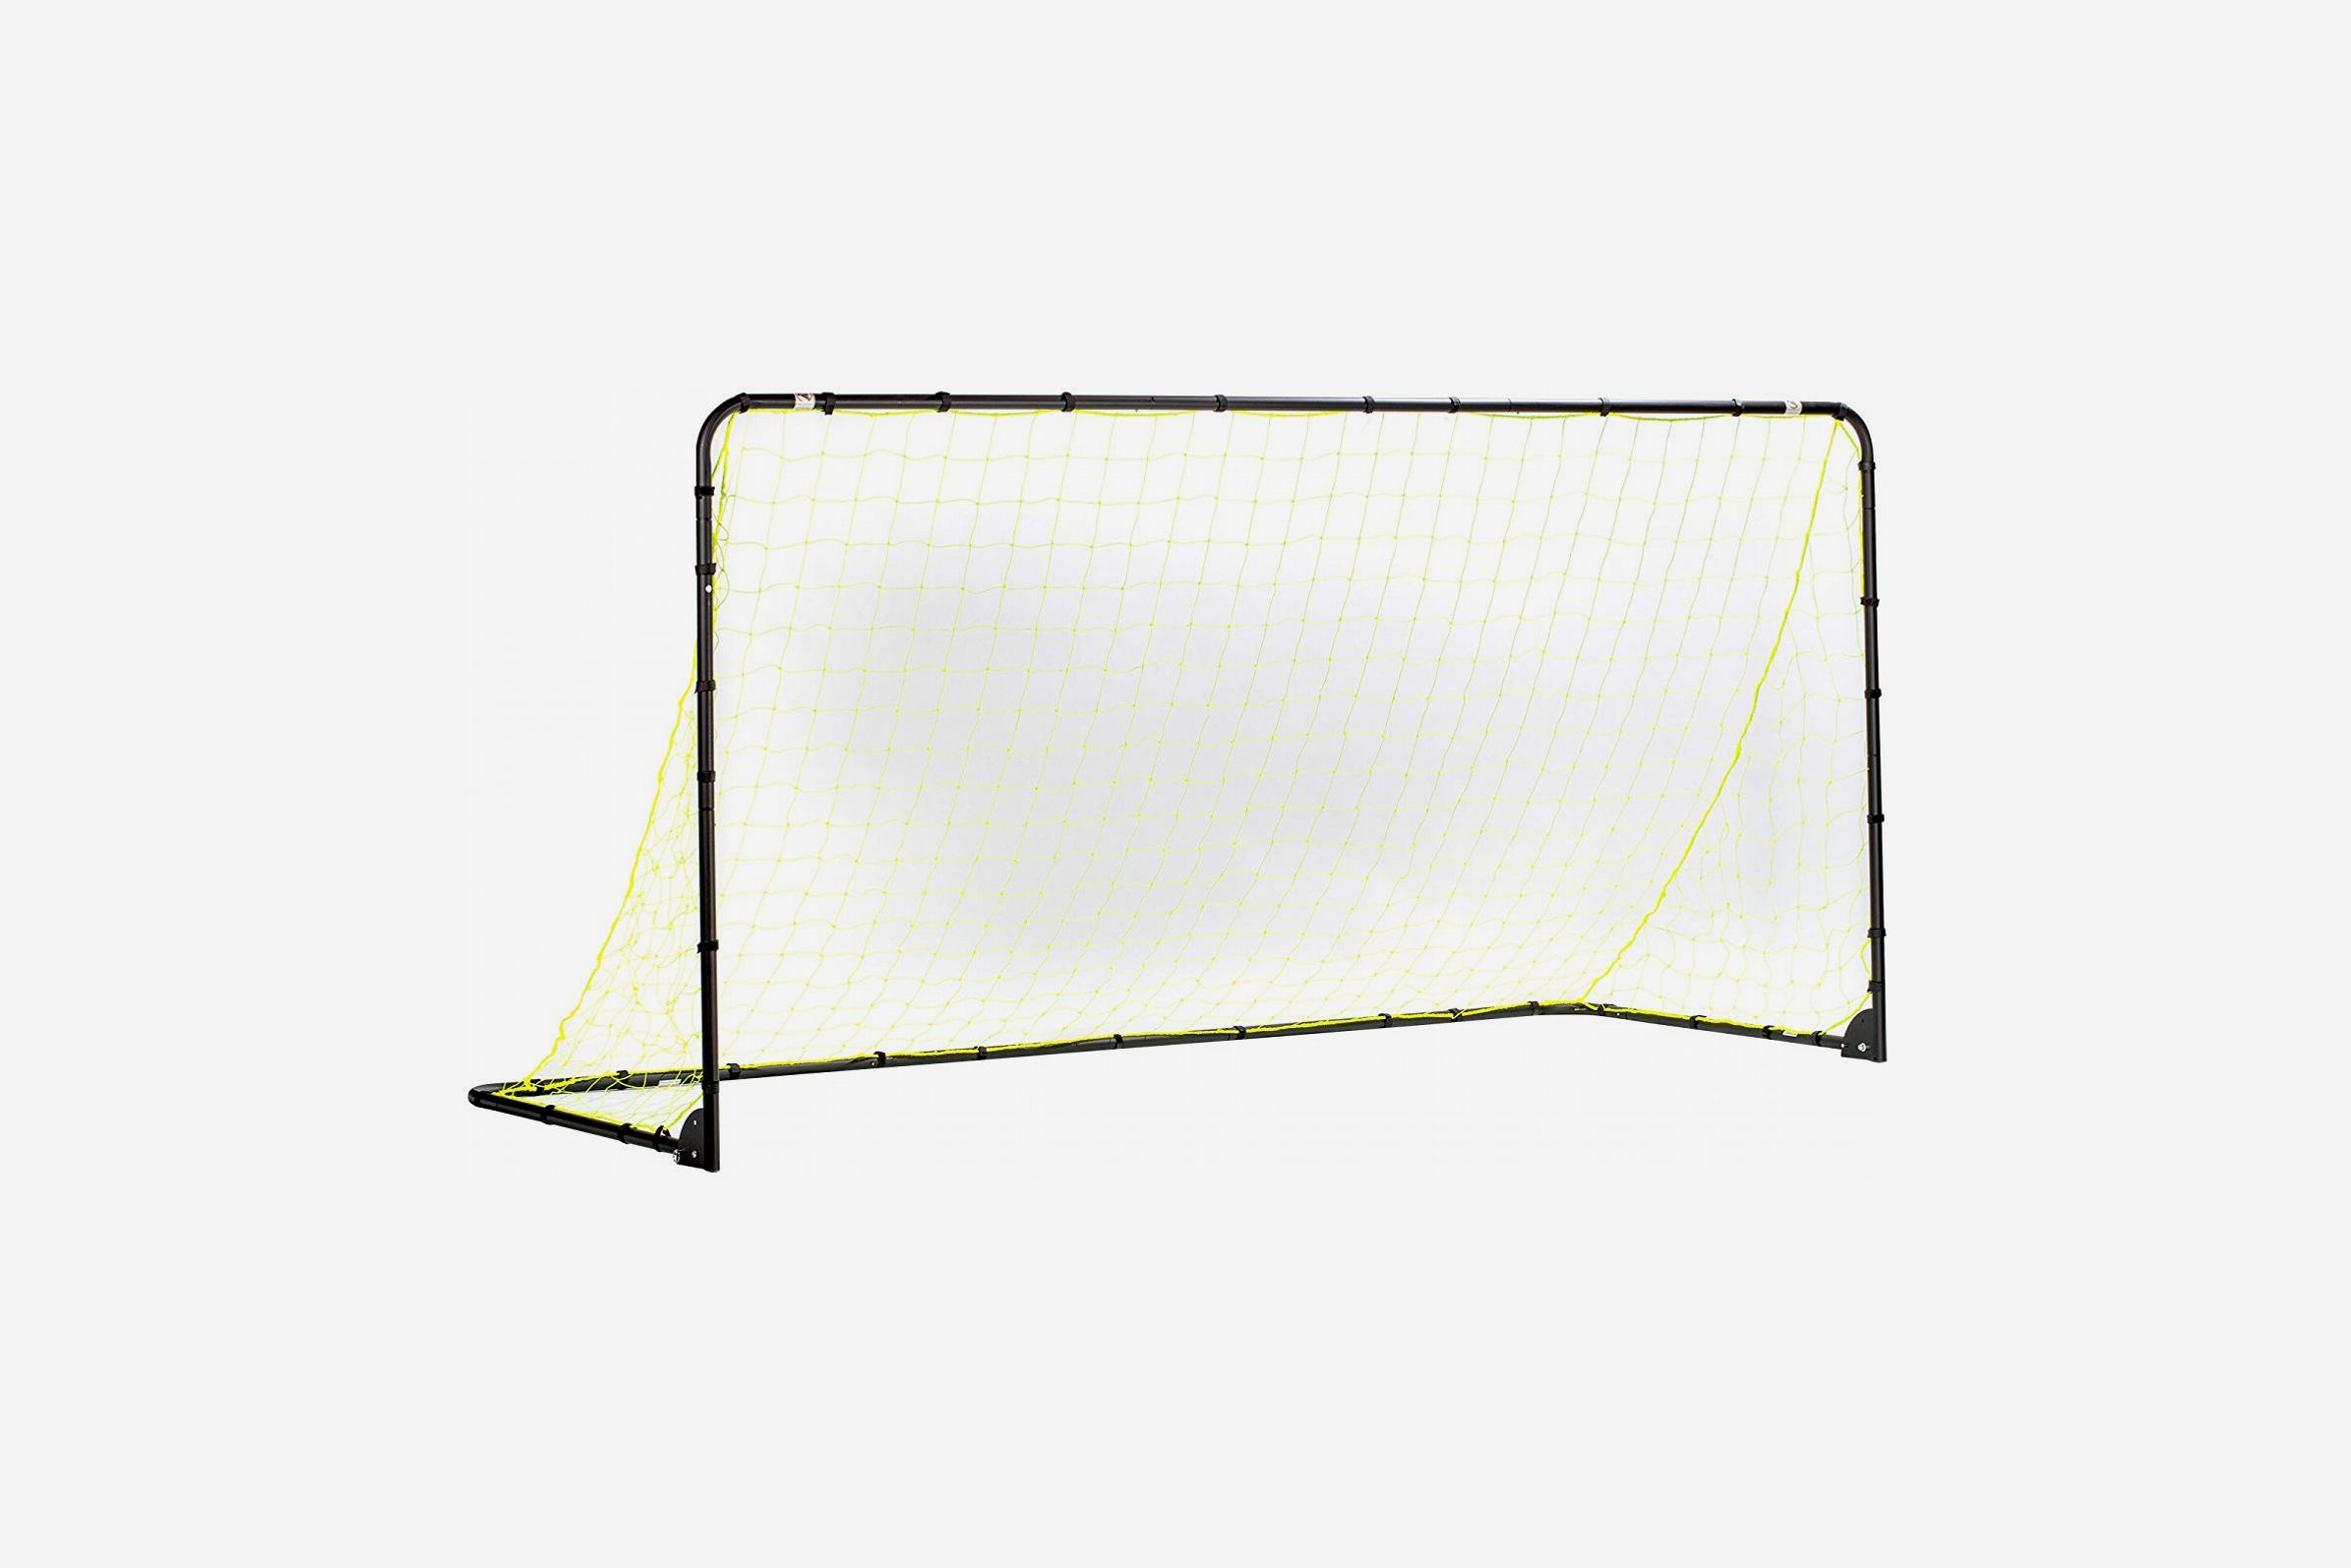 Easy Assembly and Compact Storage Training Soccer Goal Great for Kids and Adults Two 1.5 x 1 or One 3 x 2 Sport Squad Mini 2-in-1 Dual Use Training Soccer Goal Net Set